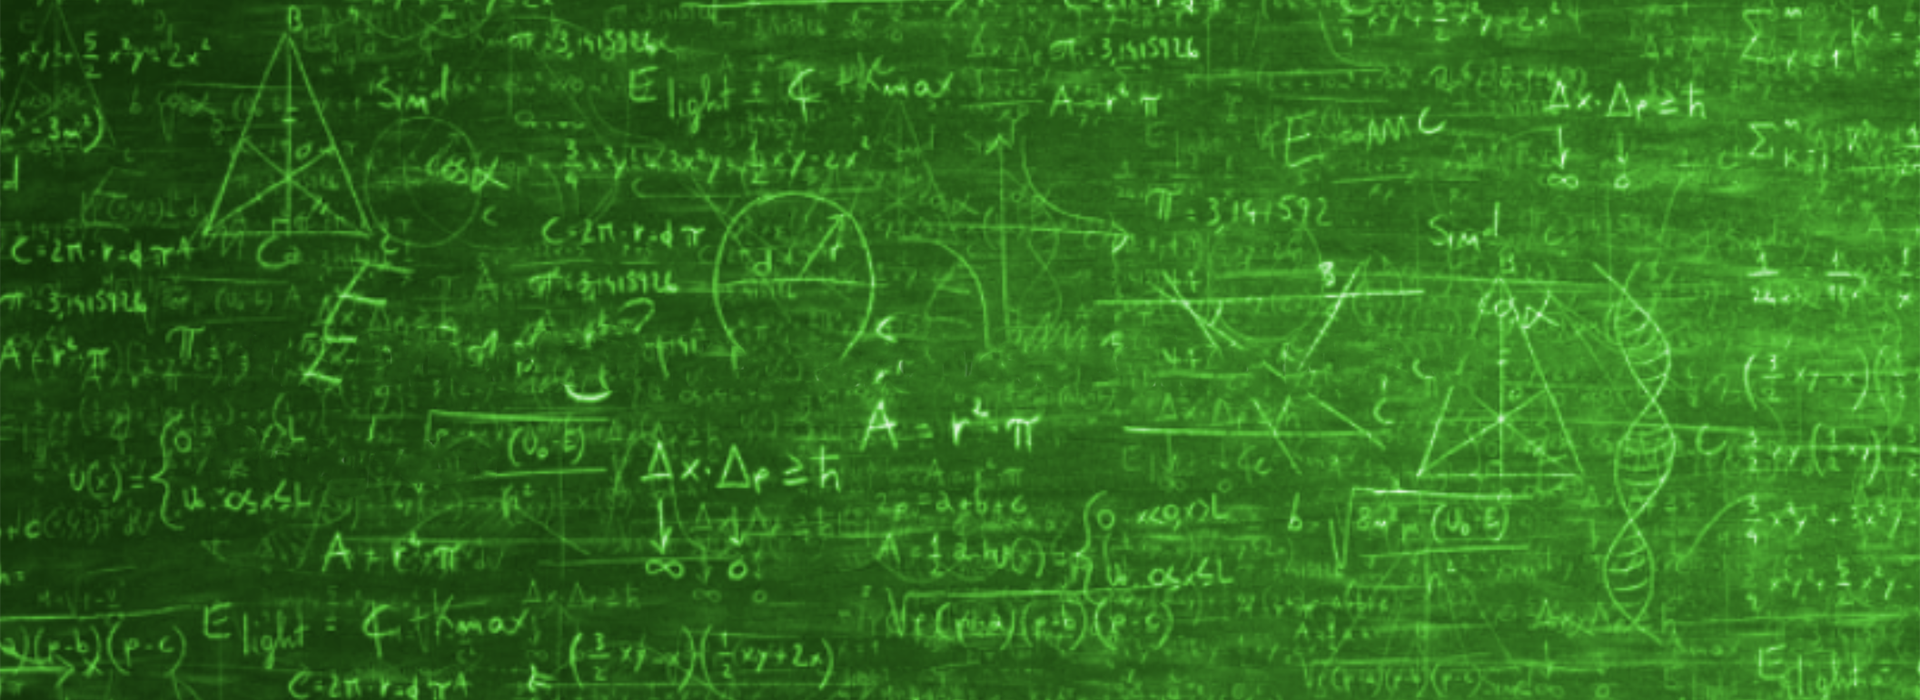 lots of math equations on a chalkboard